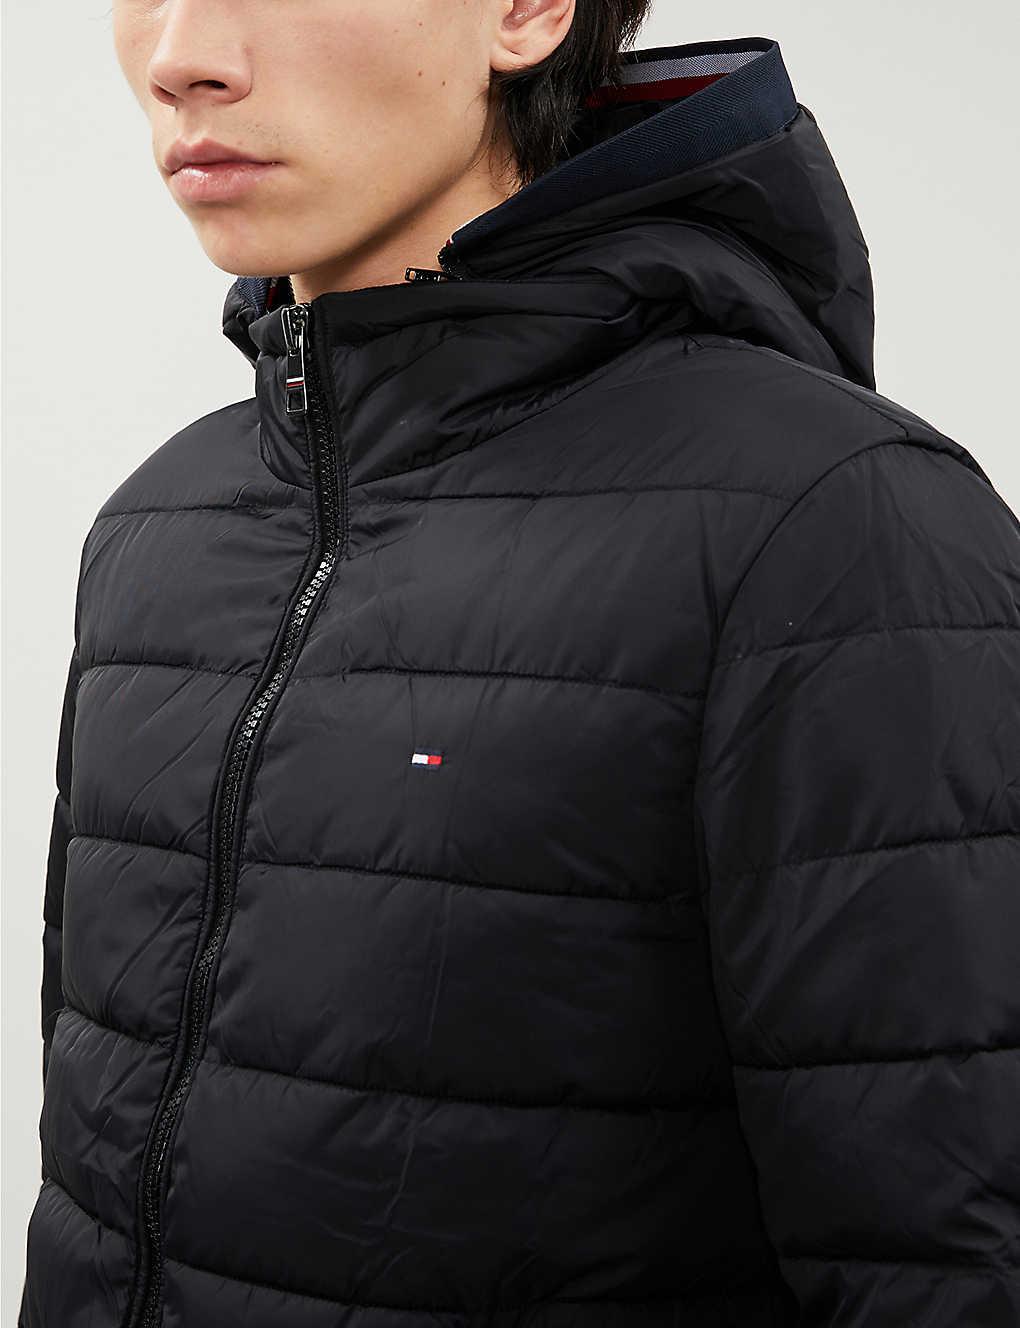 Tommy Hilfiger Th Tech Padded Jacket in Black for Men - Lyst